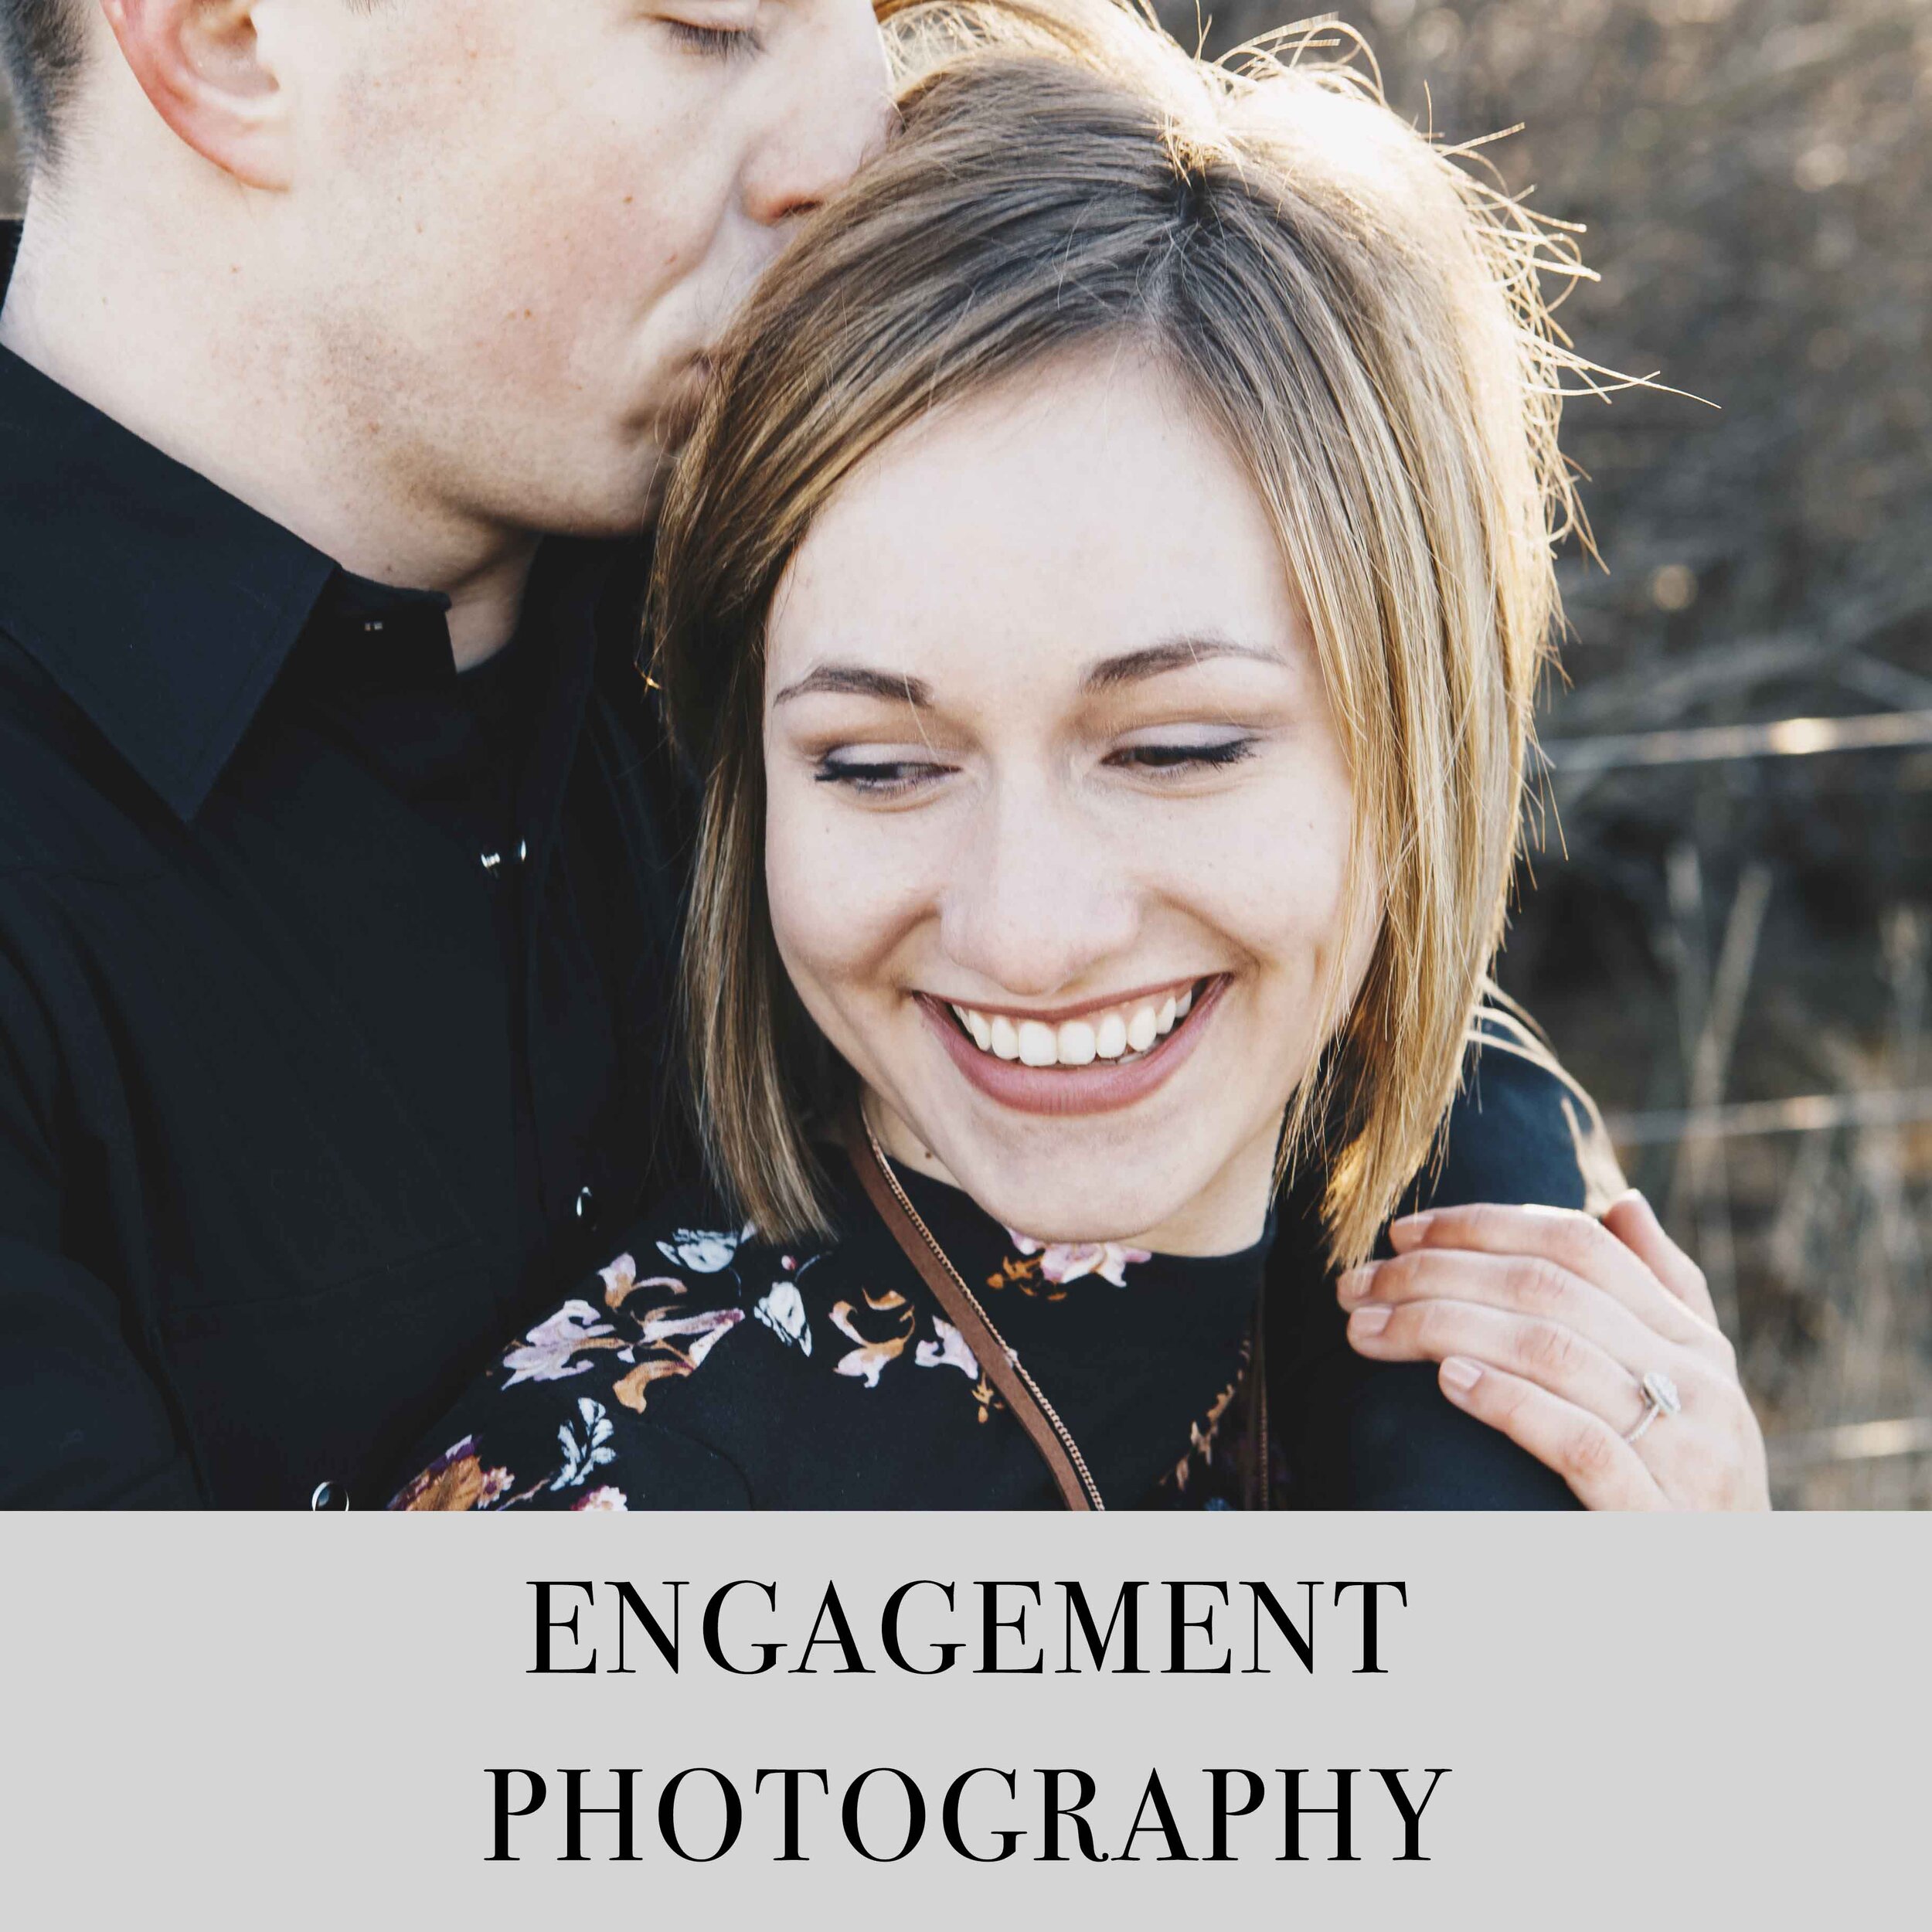 3 Reasons Why Engagement Photos Are Important